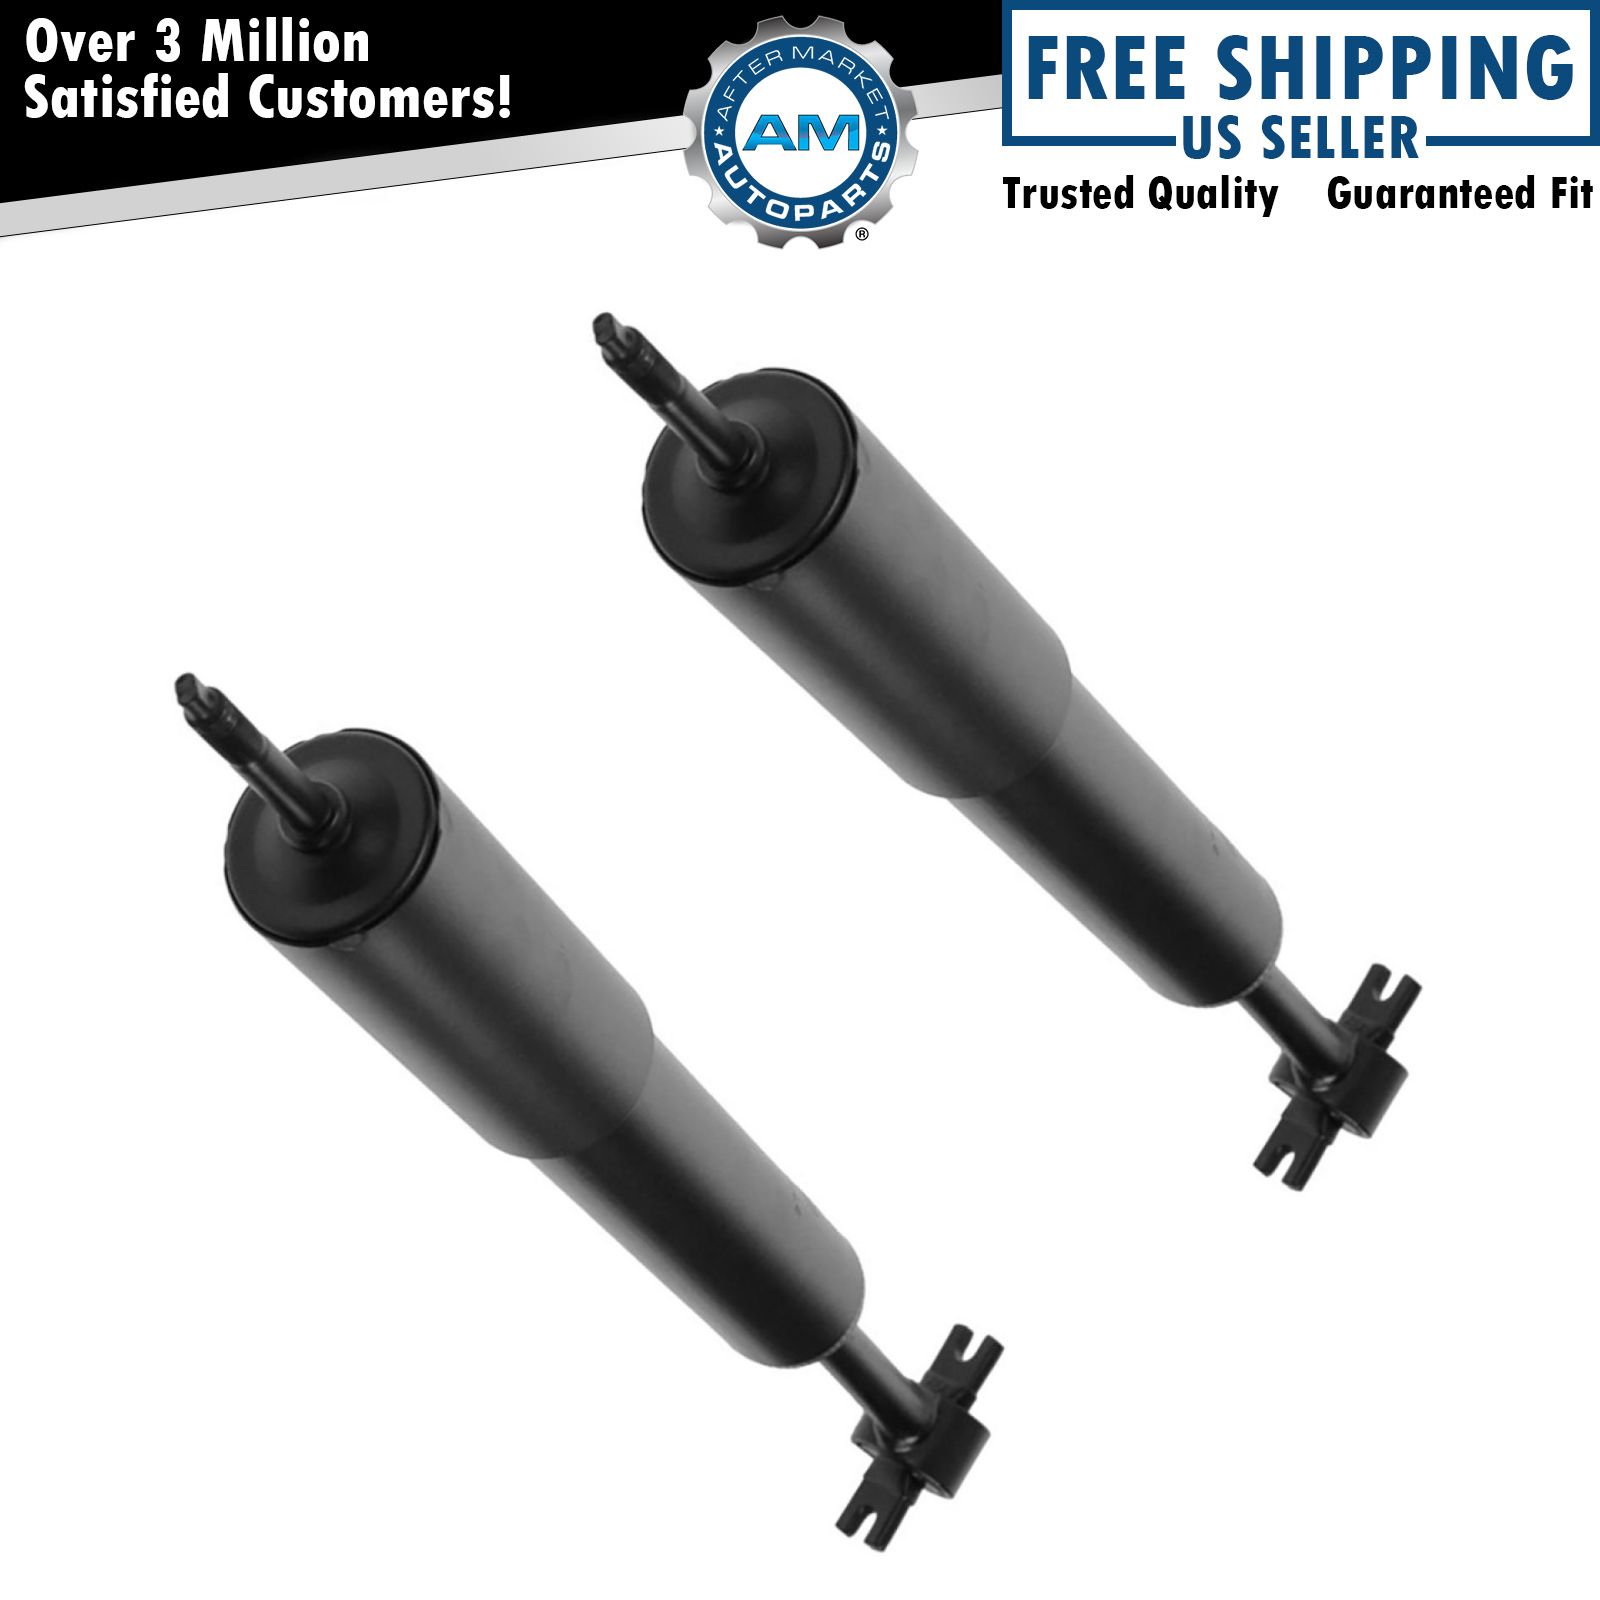 Front Strut Shock Absorber Pair Set of 2 NEW for Ford Mazda Mercury Pickup SUV